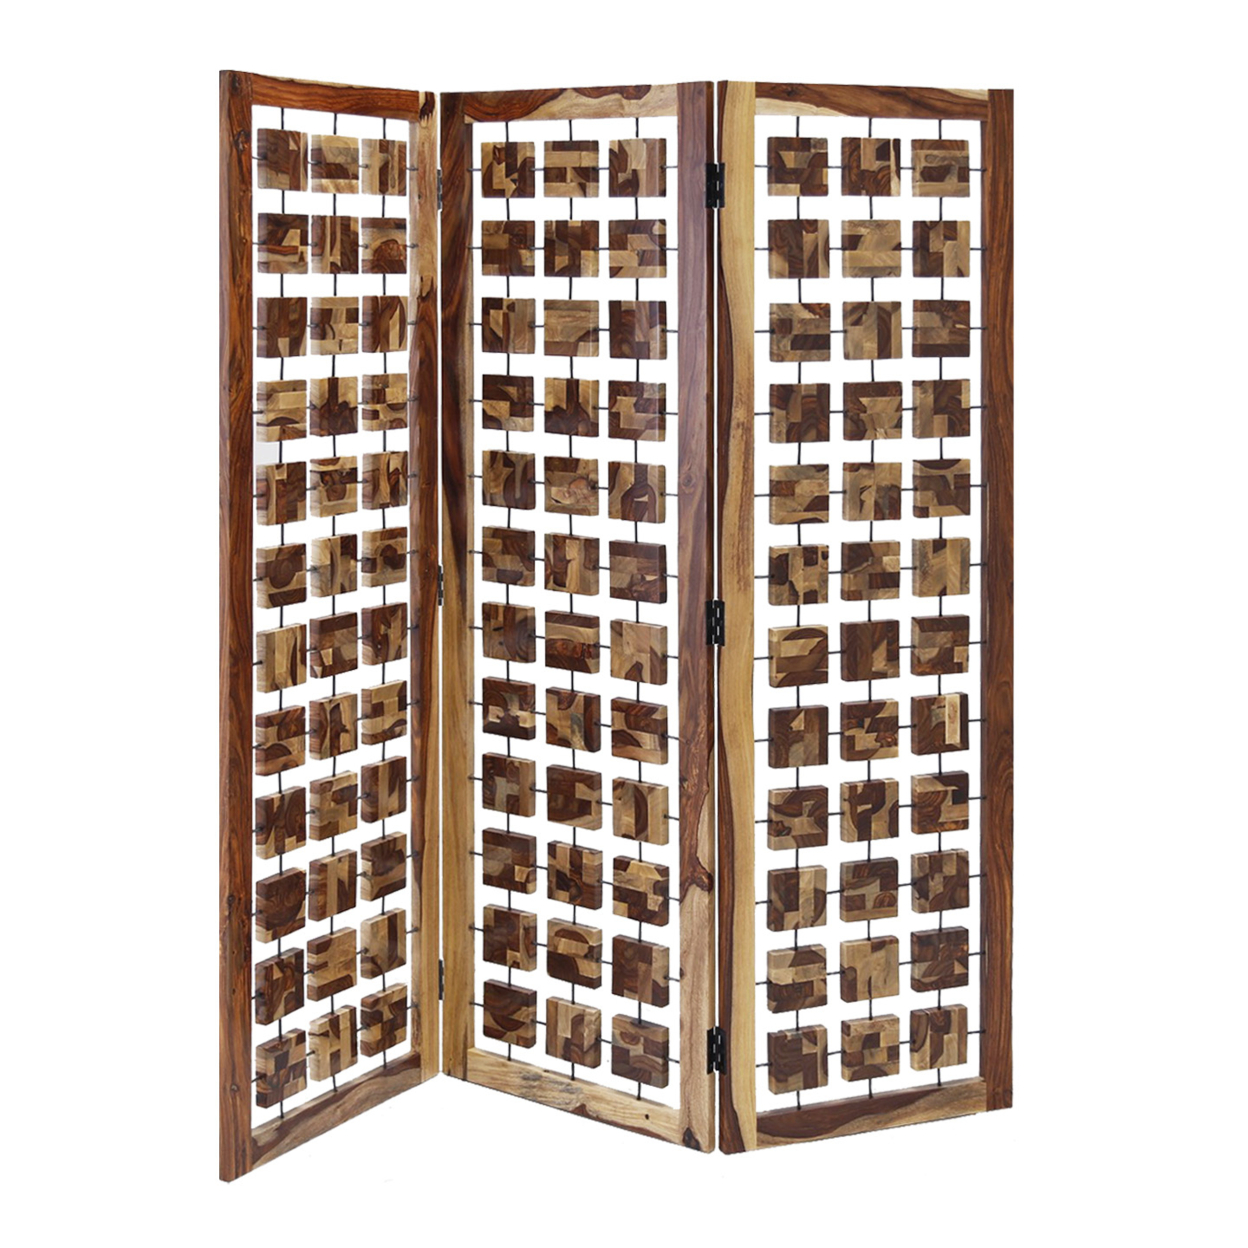 Wooden 3 Panel Room Divider With Interconnected Square Blocks, Brown- Saltoro Sherpi